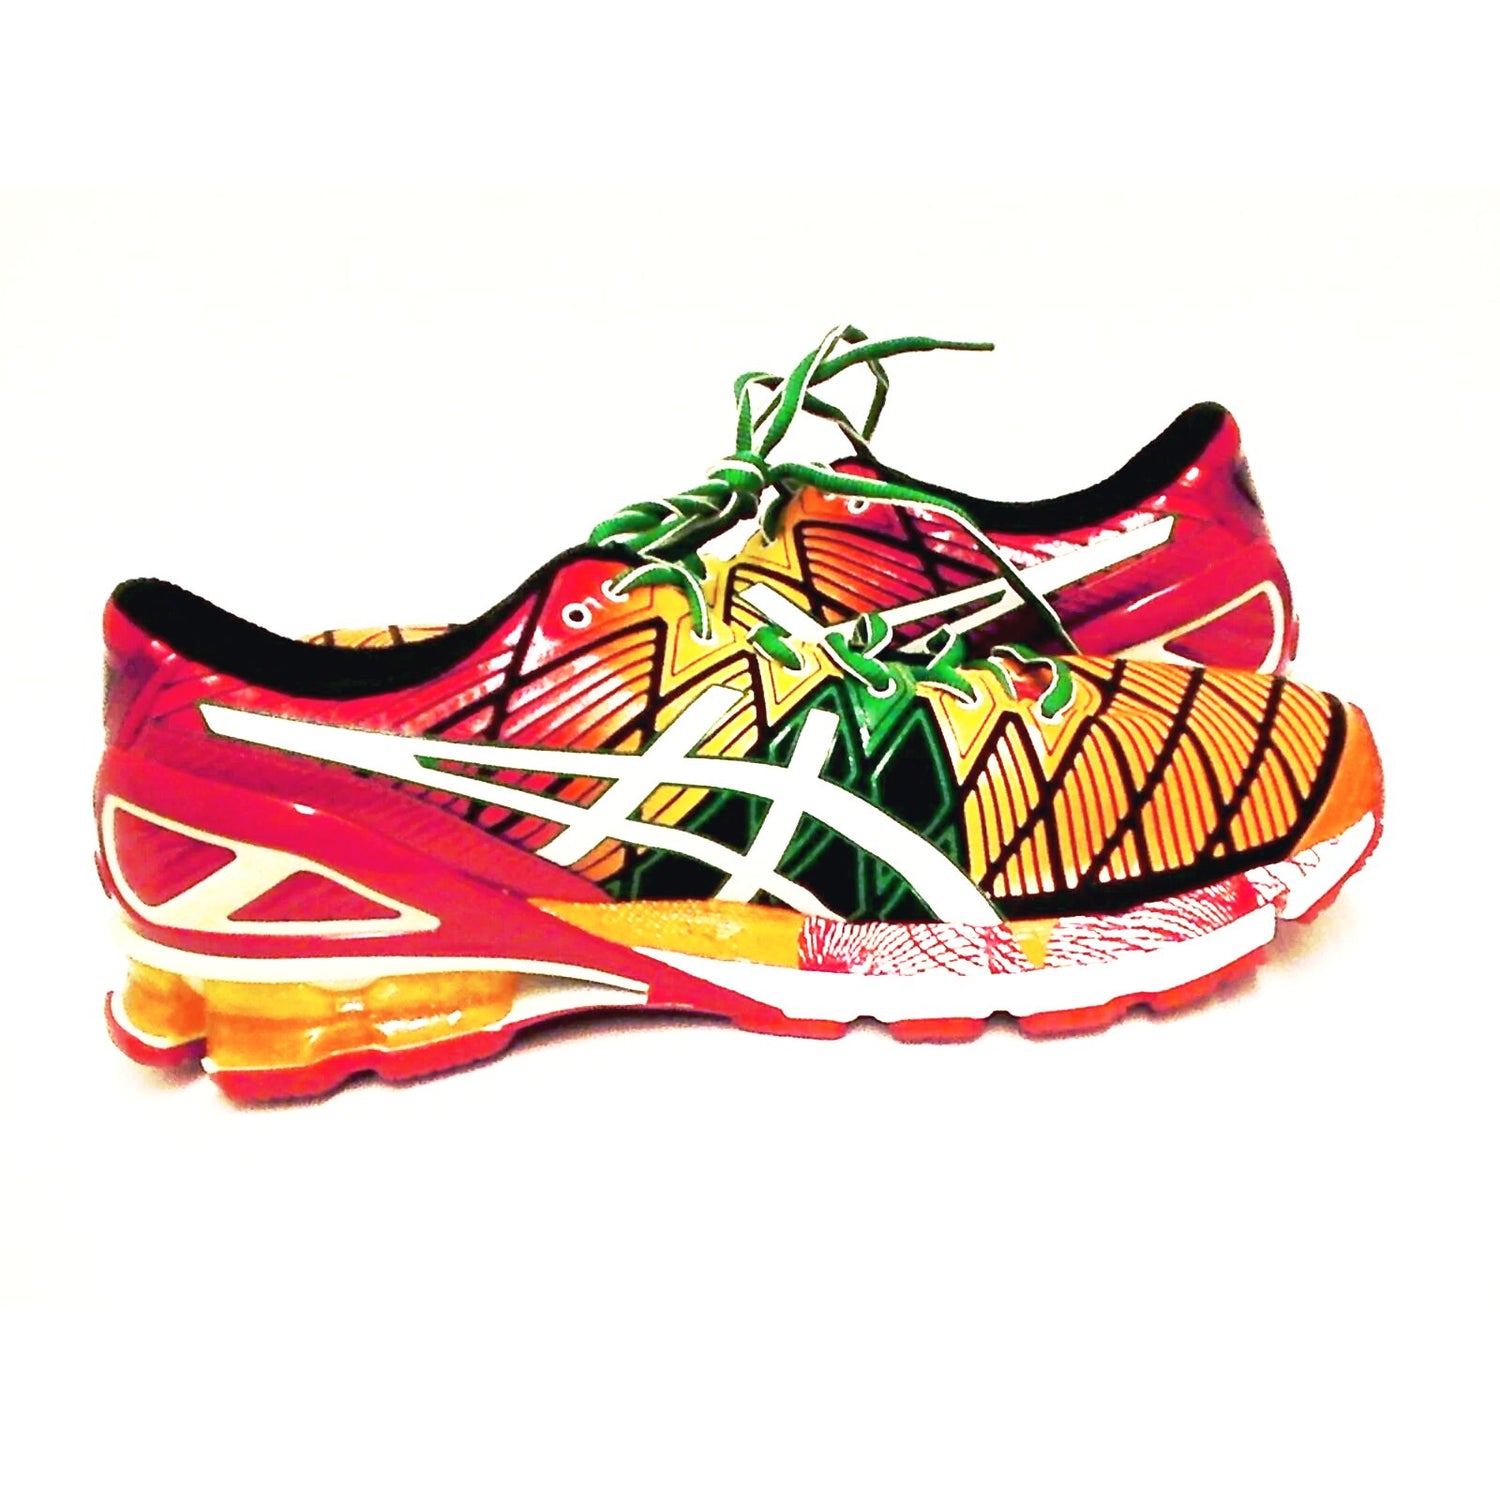 Mens Asics running shoes GEL-KINSEI 5 multi color size 10.5 us